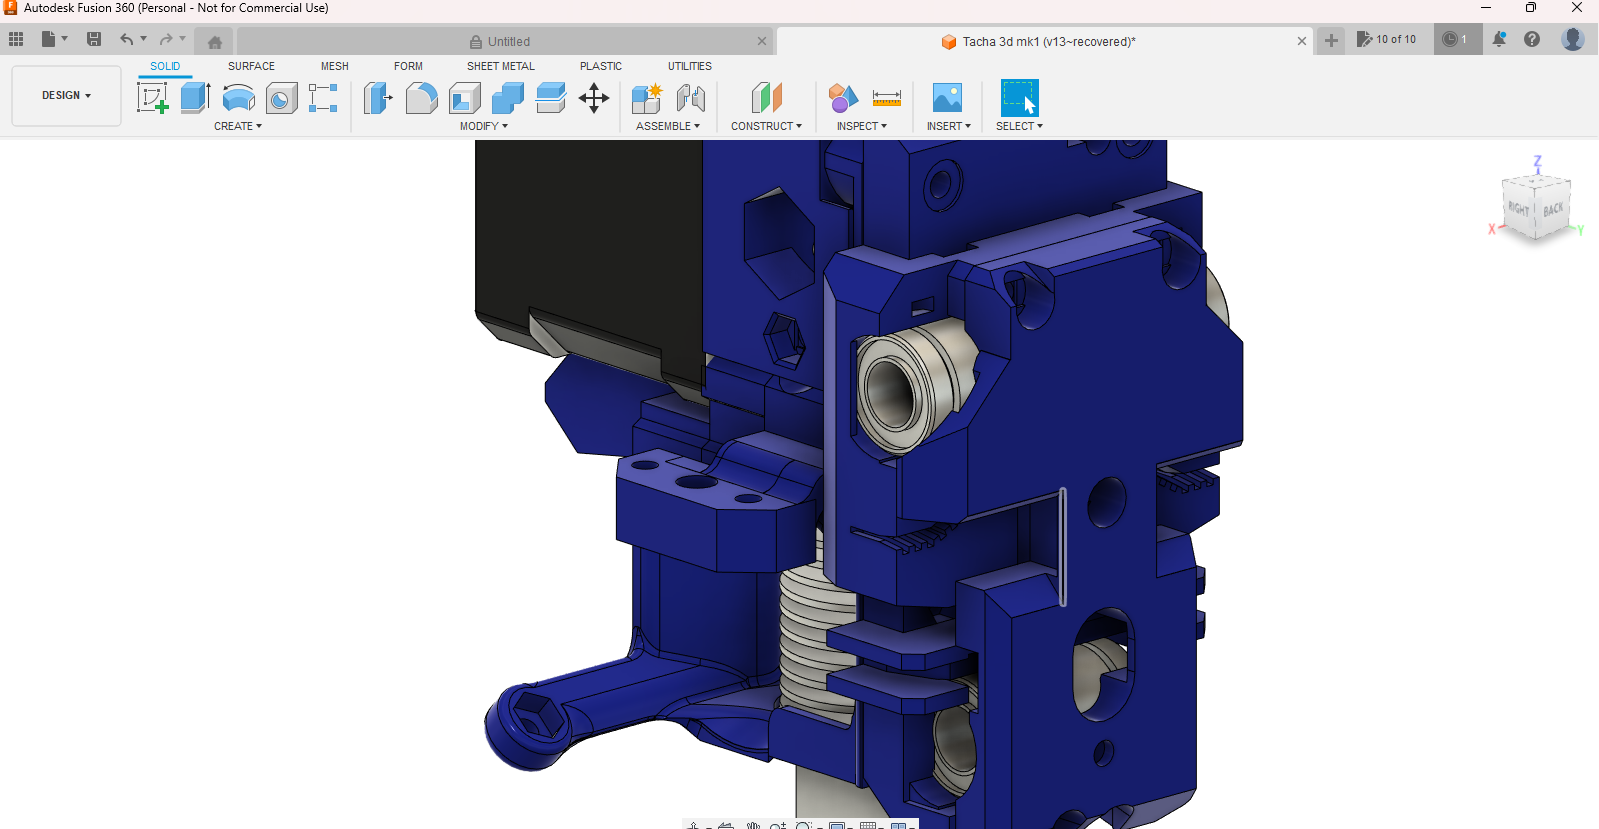 Autodesk Fusion 360 (Personal - Not for Commercial Use) 6_29_2023 10_09_14 PM.png